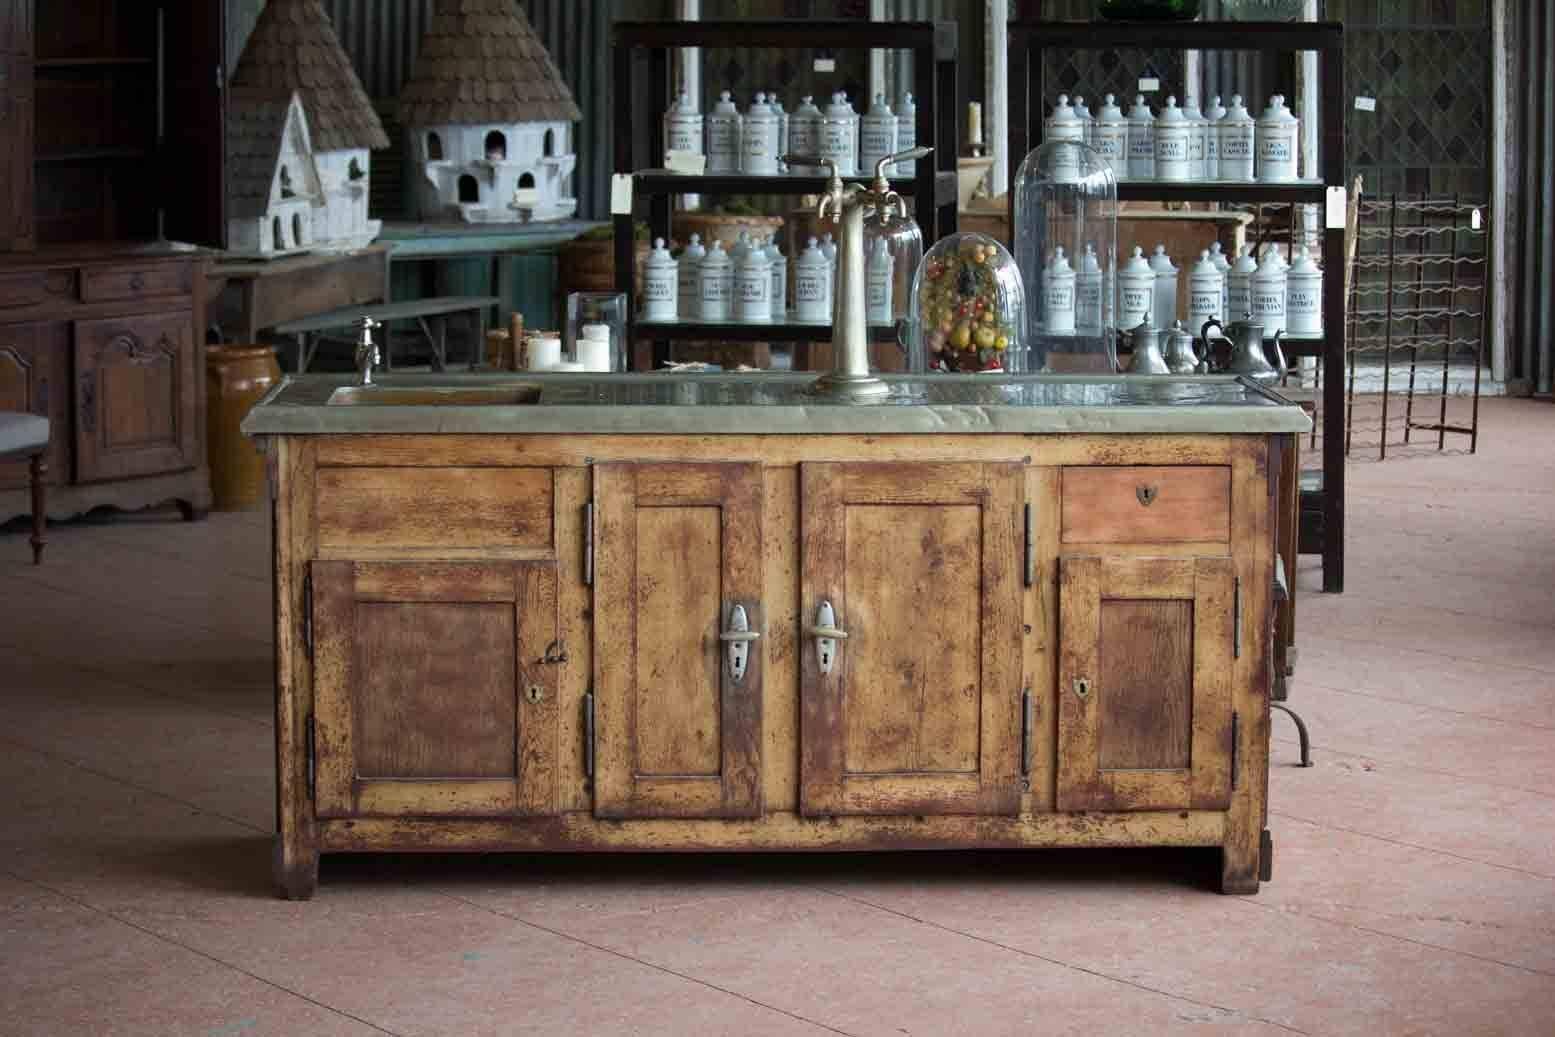 A beautiful zinc and wood paneled bar with drain holes to the top from Alsace, France. The sink is copper. The interior is metal lined and ready for plumbing. The metal has a lovely rolled edge to the front and original taps and hardware to complete